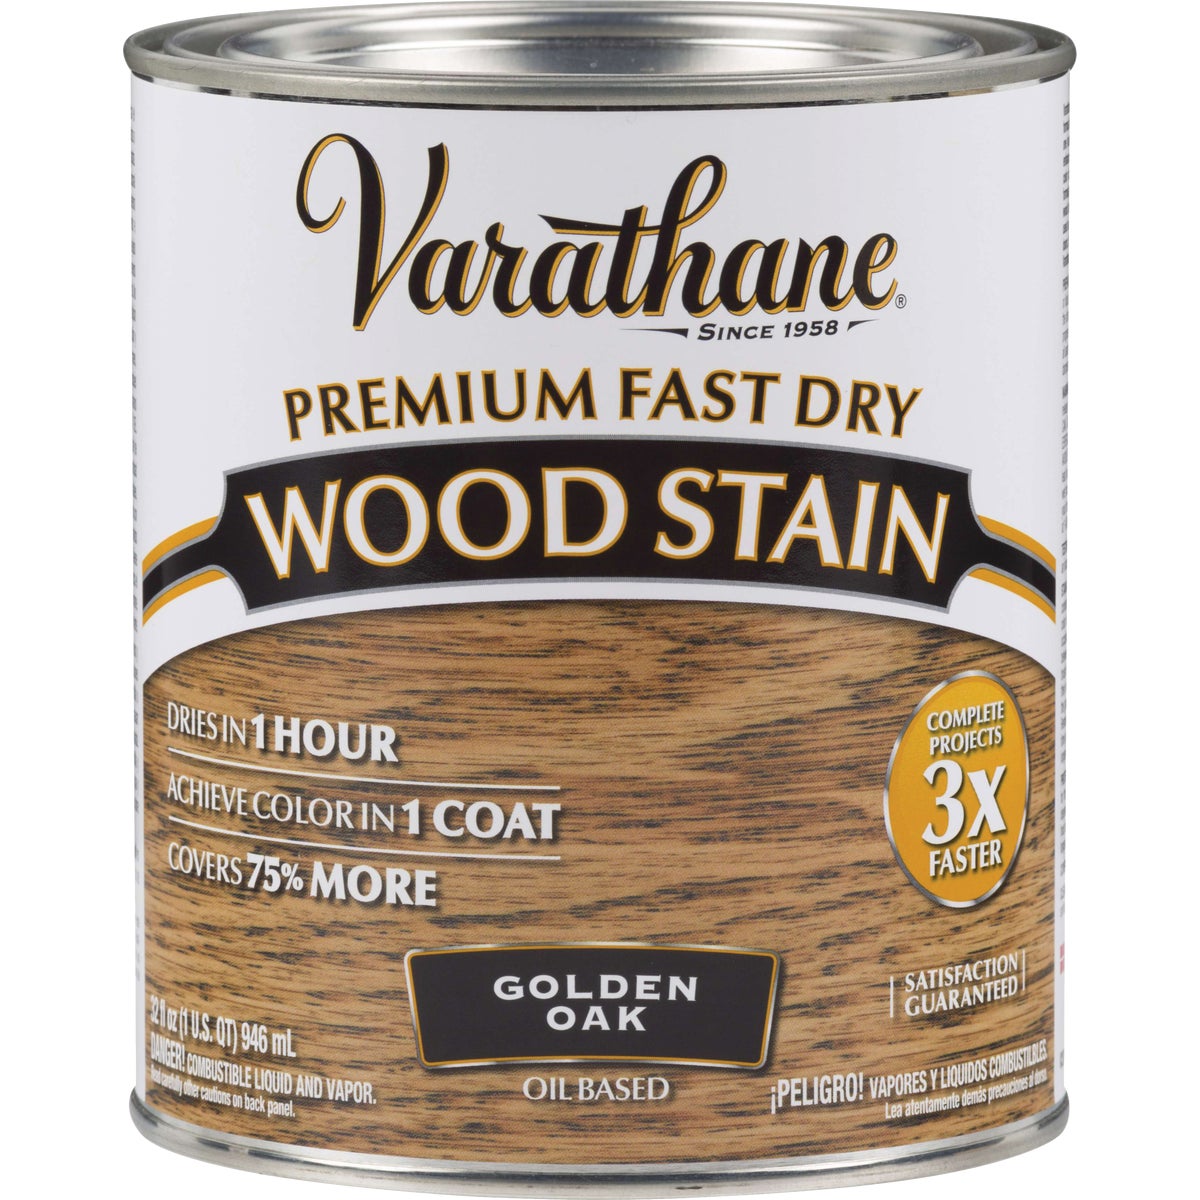 Item 776611, Varathane Fast Dry Wood Stains are quick drying; high performance stains 